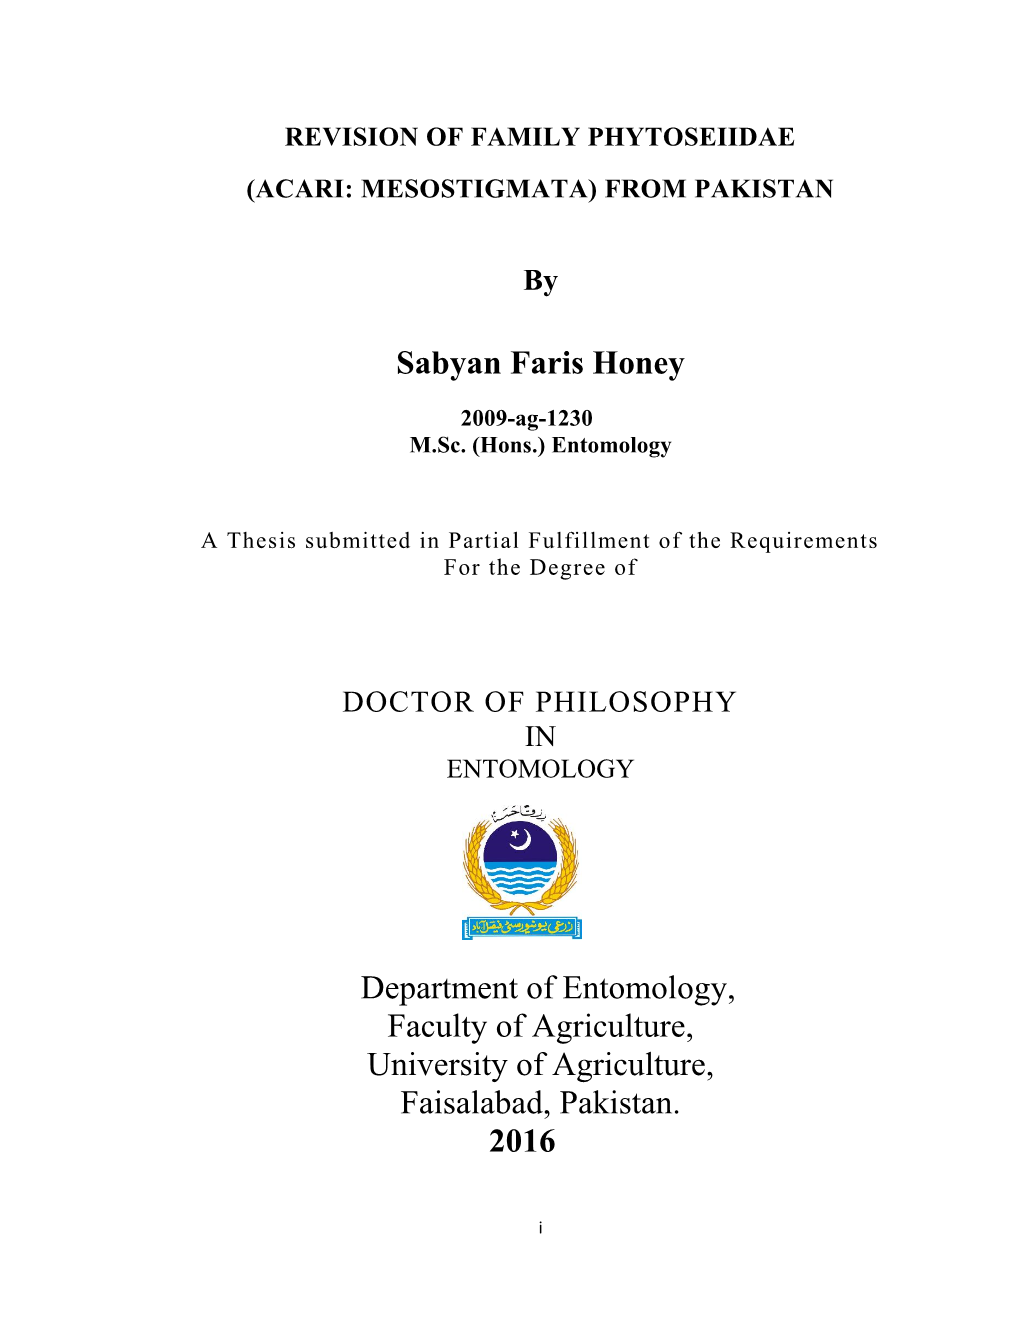 Sabyan Faris Honey Department of Entomology, Faculty of Agriculture